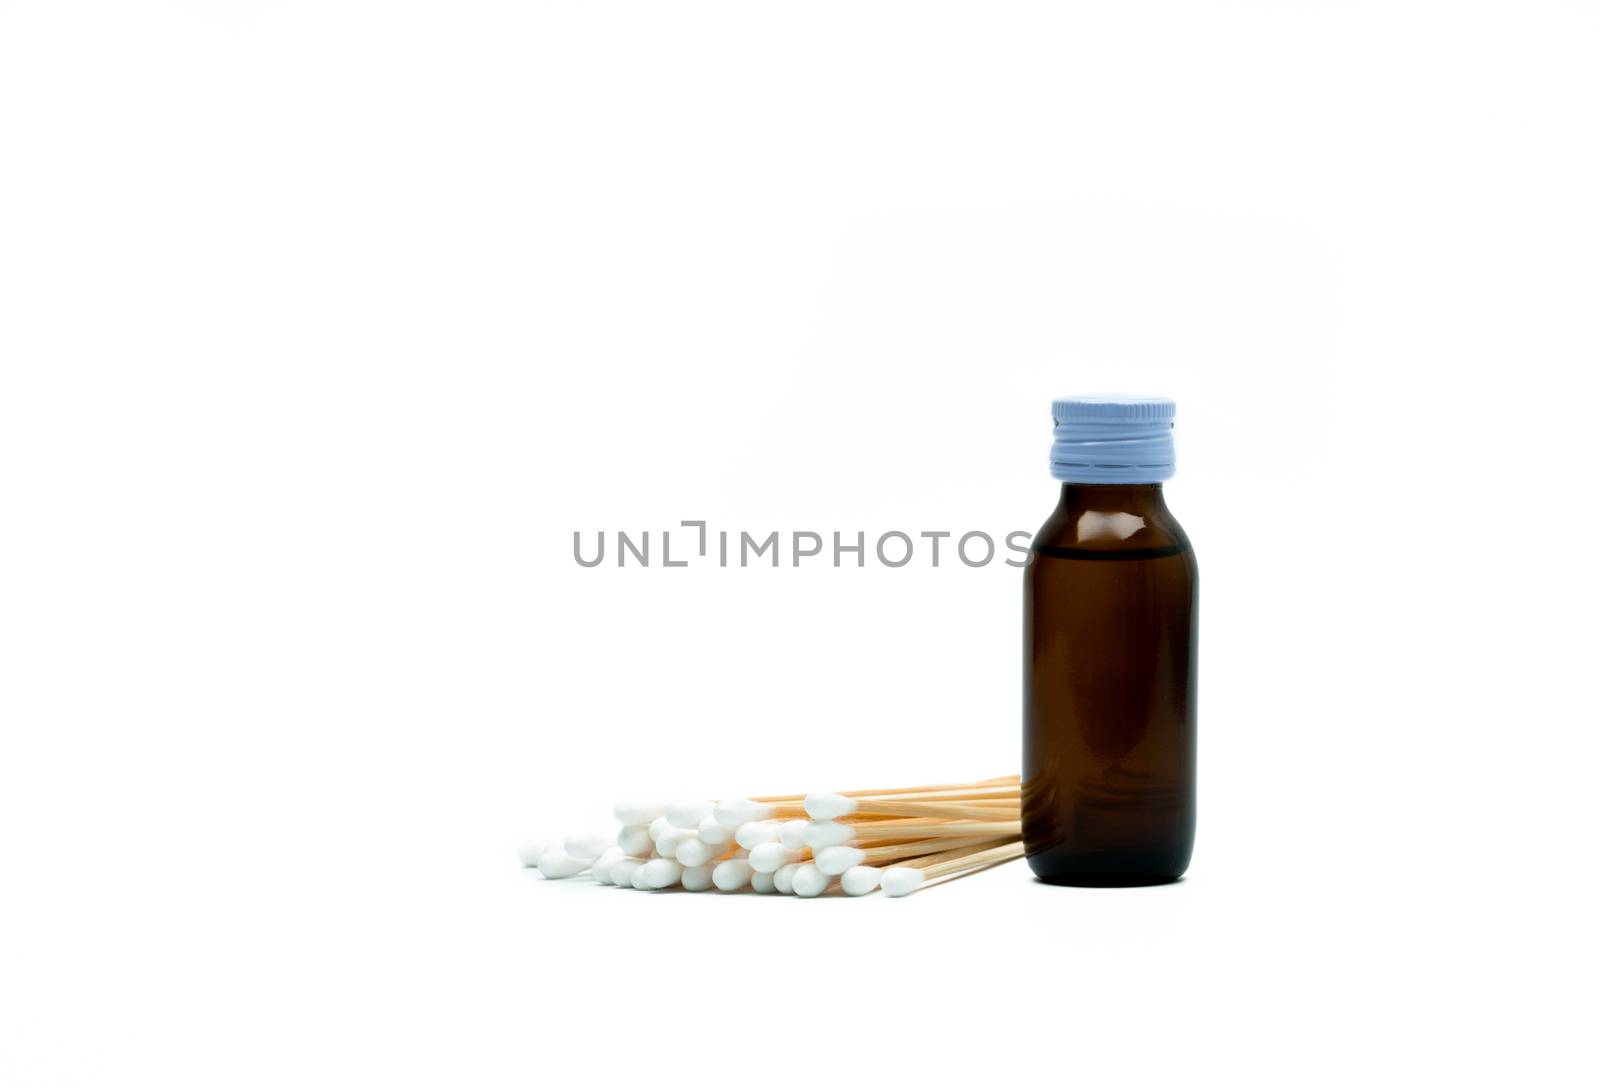 Cotton sticks and antiseptic solutions in amber glass bottle isolated on white background. Concept of Umbilical cord care for helps prevent infection. Infant's umbilical cord cleaning care equipment.